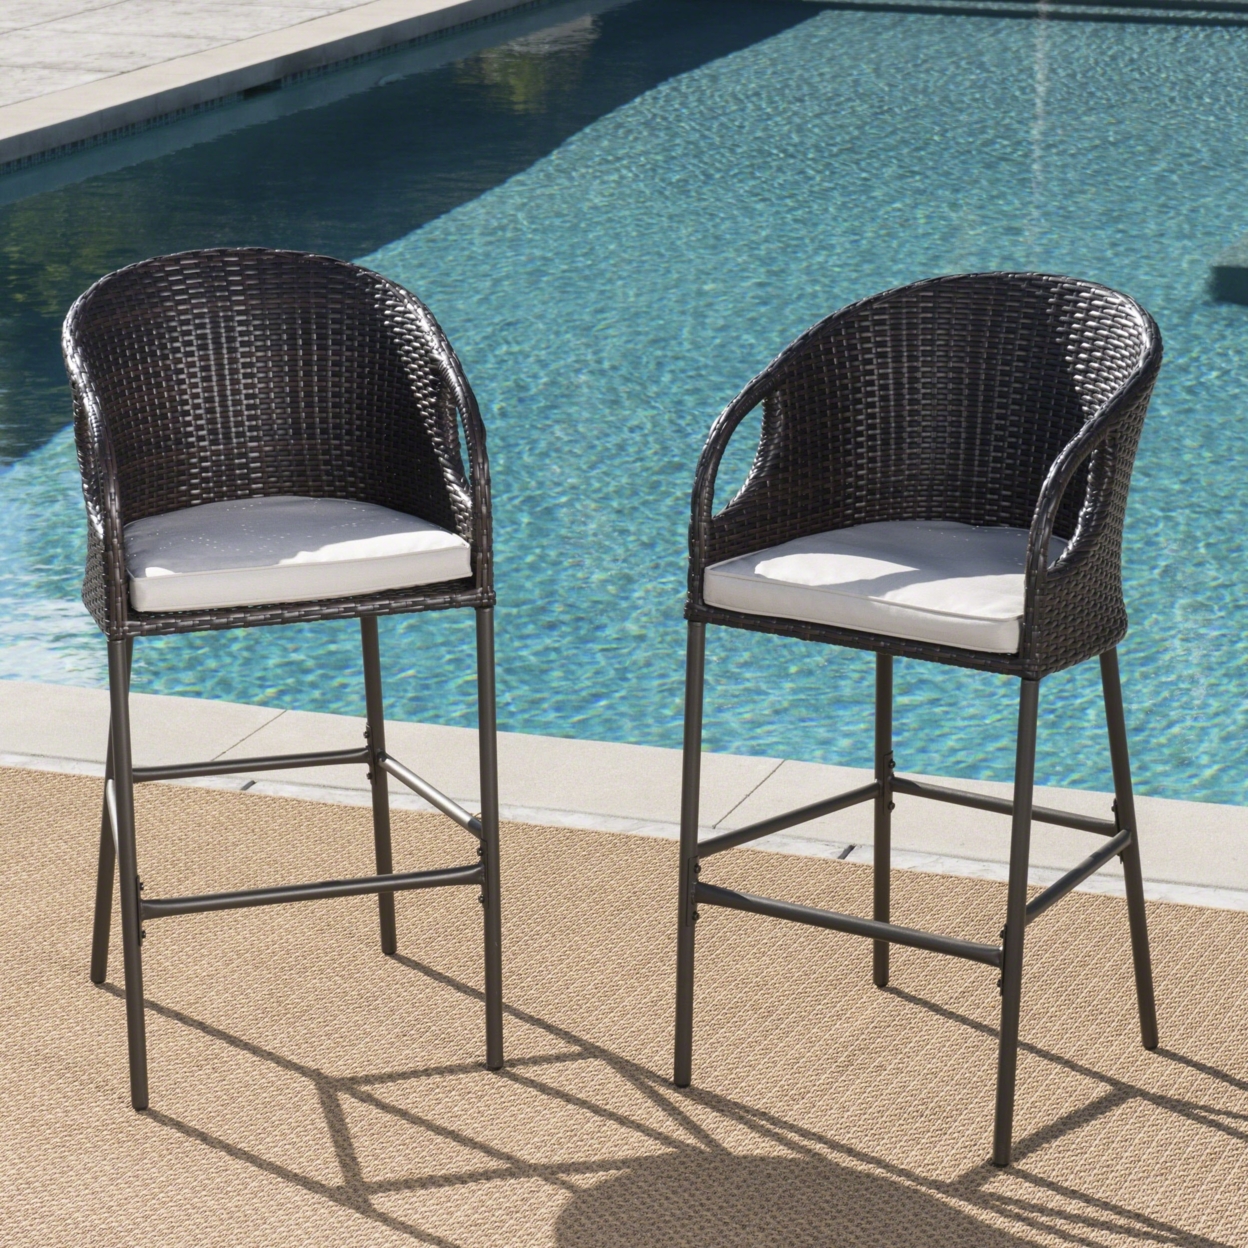 Dunlevy 31-Inch Outdoor Wicker Barstools With Water Resistant Cushions - Wicker, Set Of 2